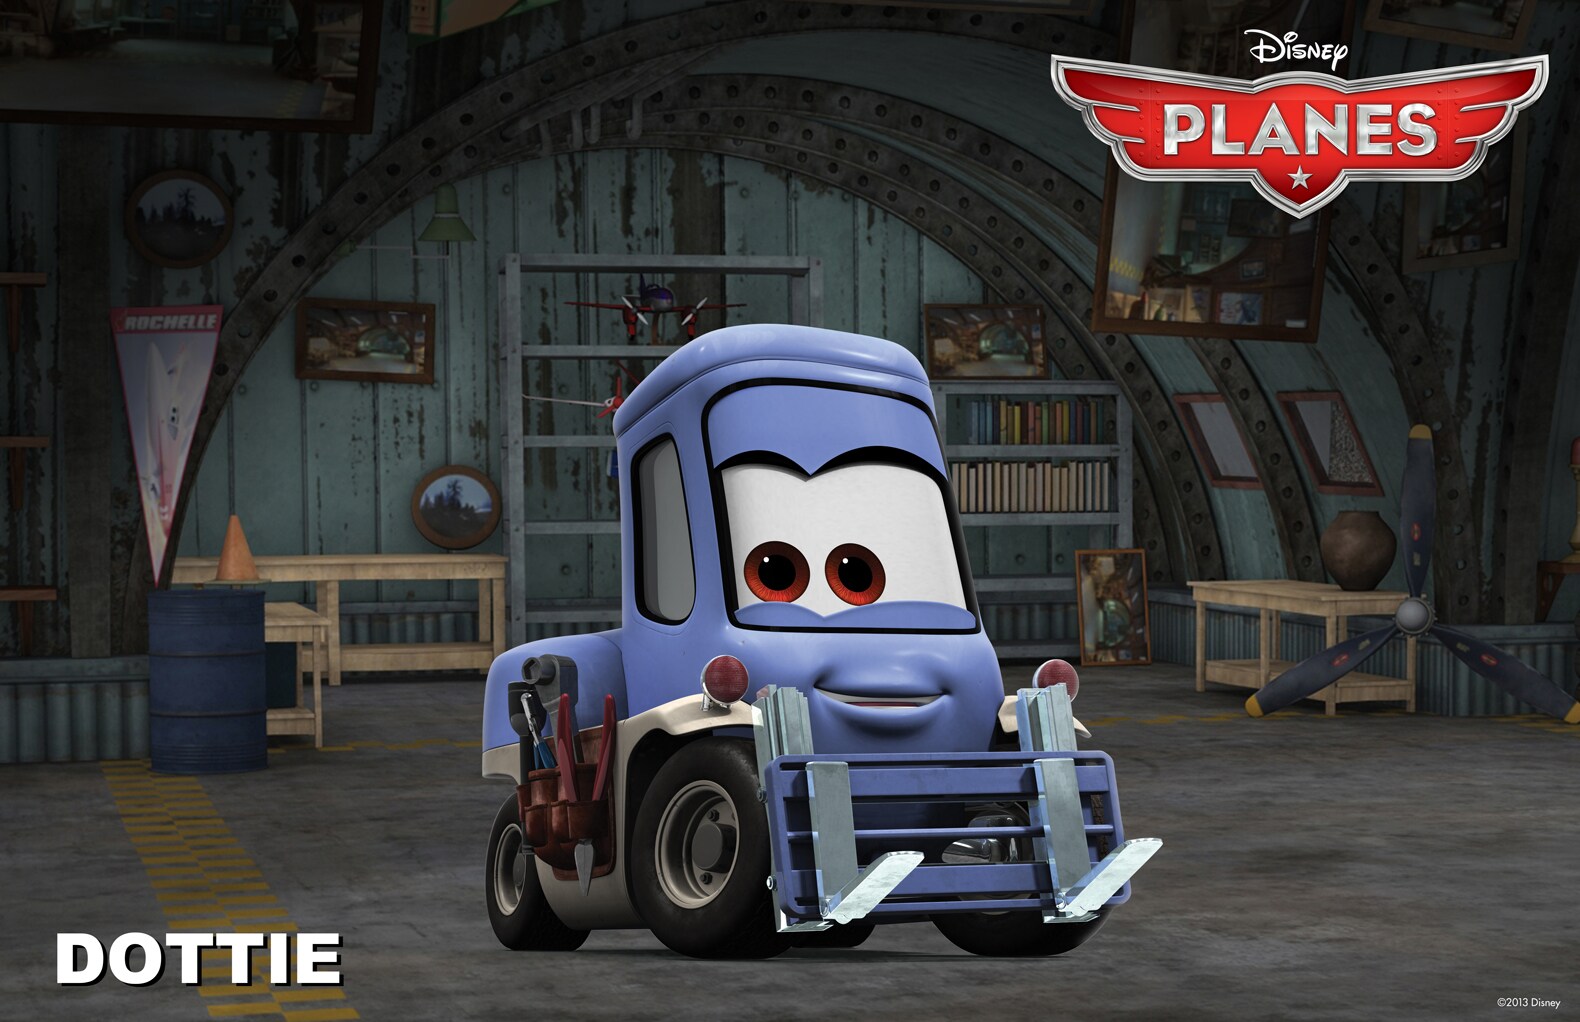 Dottie the forklift from the movie "Planes"